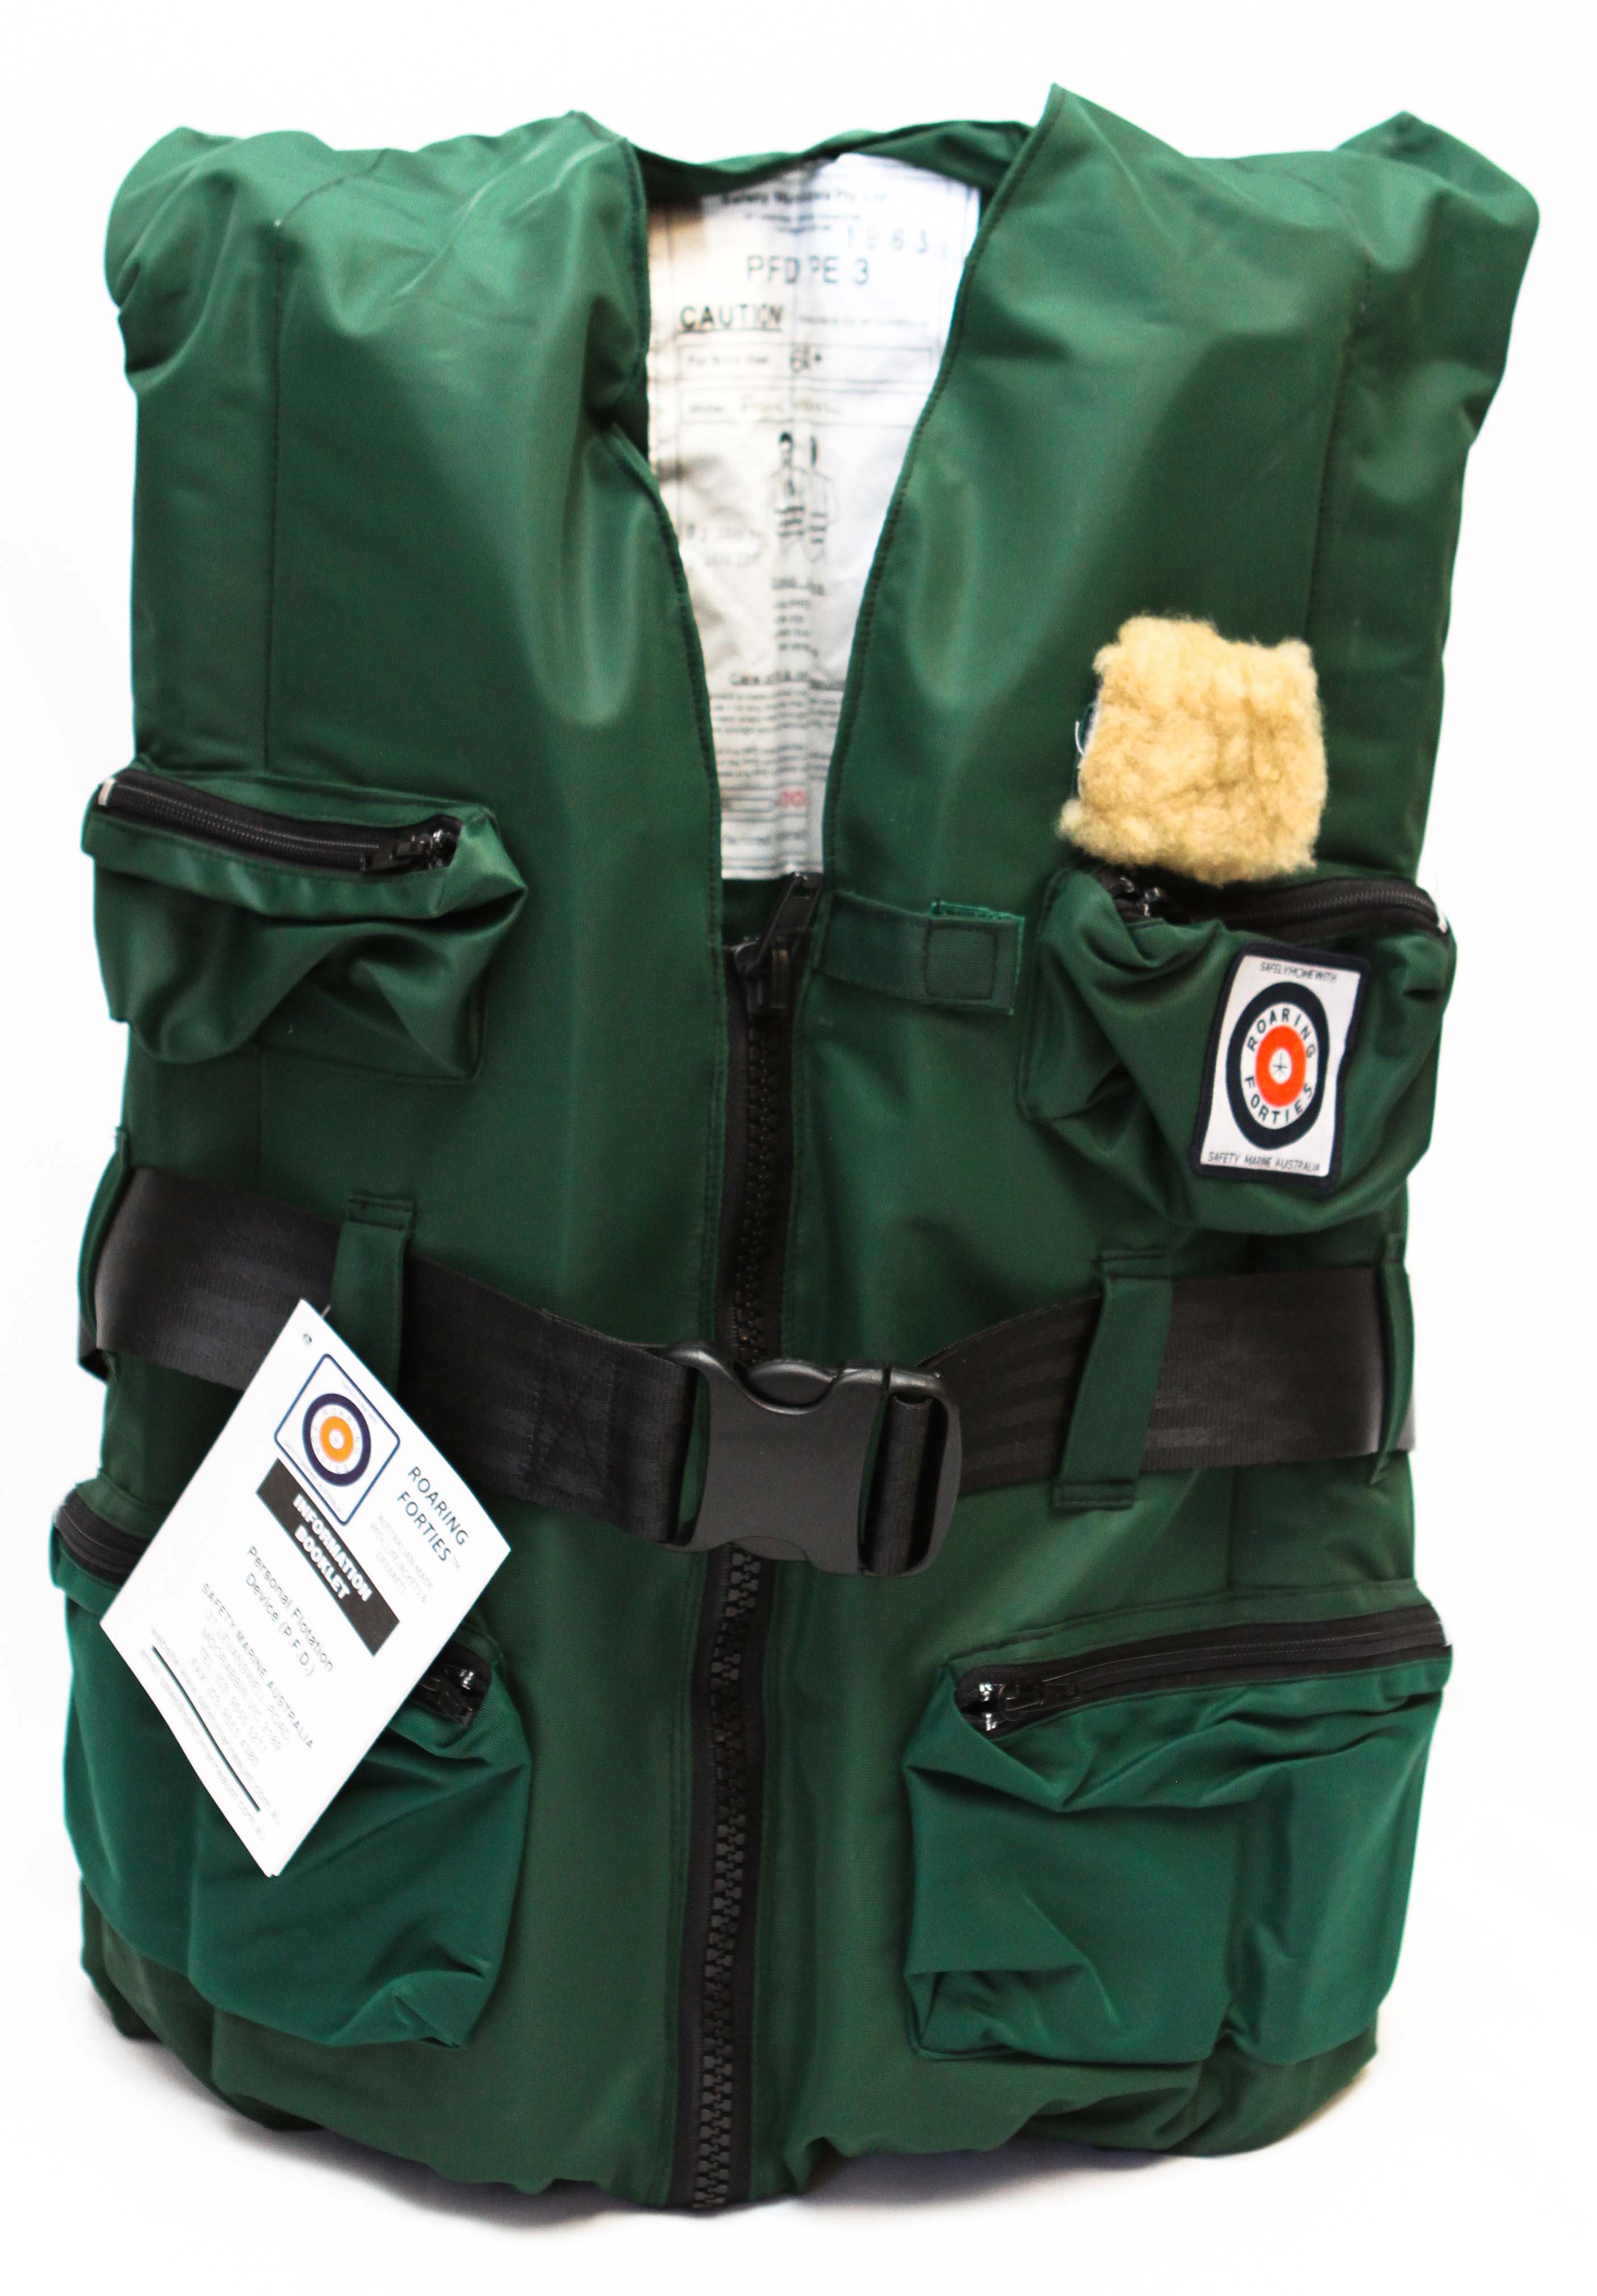 R40 MADE Australian Made Safety Equipment Life rafts & Life Jackets  IMMERSION SUITS, EPIRBS, PLBS Marine & Aviation On Line Sore